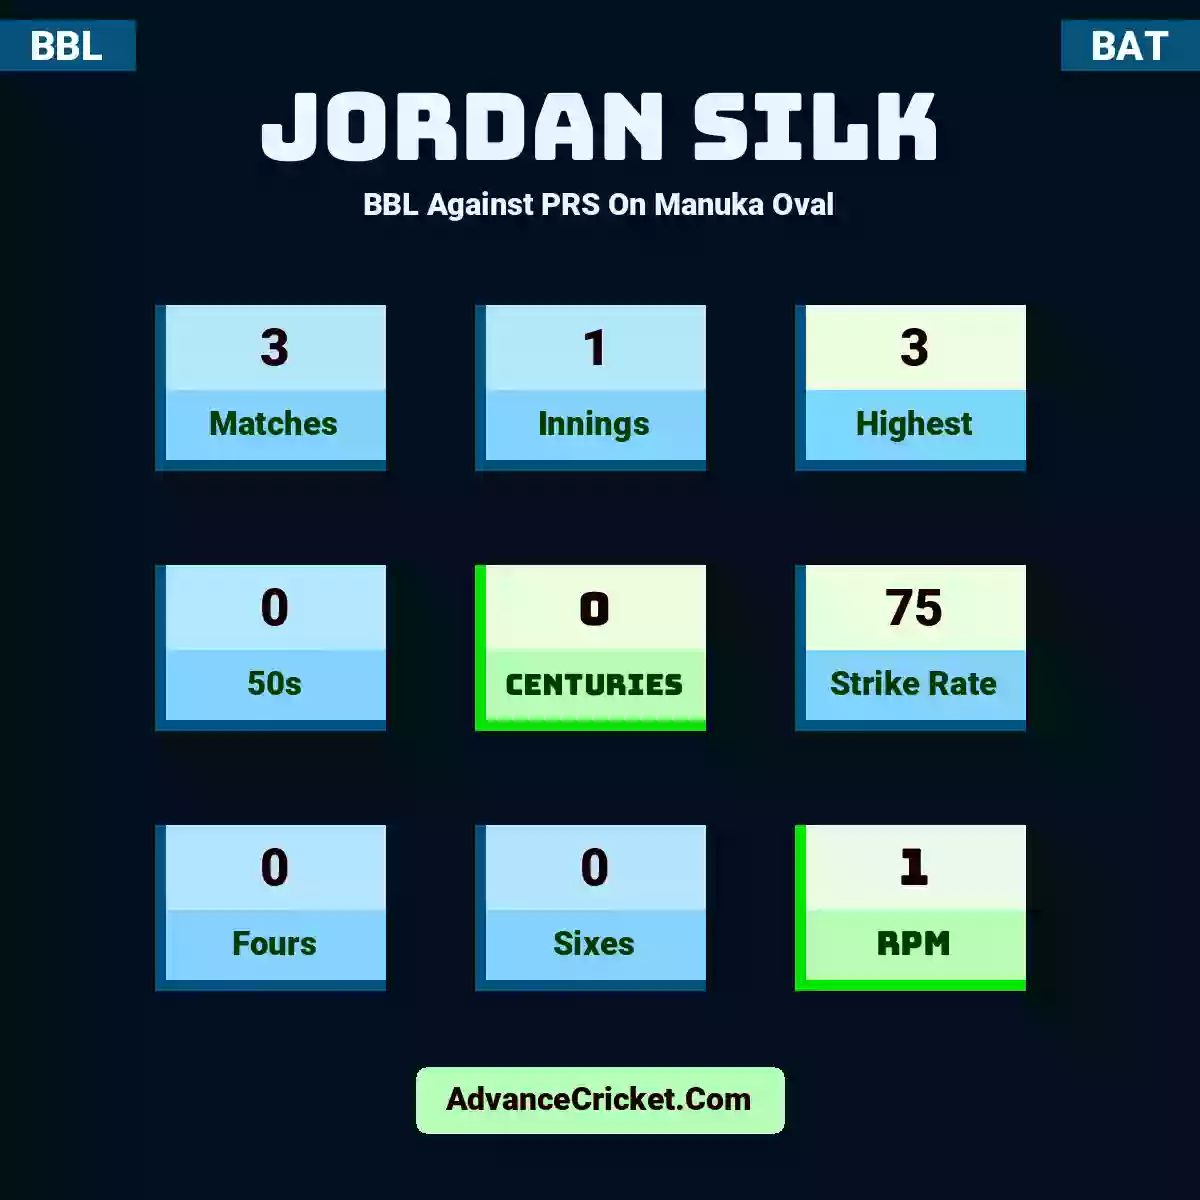 Jordan Silk BBL  Against PRS On Manuka Oval, Jordan Silk played 3 matches, scored 3 runs as highest, 0 half-centuries, and 0 centuries, with a strike rate of 75. J.Silk hit 0 fours and 0 sixes, with an RPM of 1.